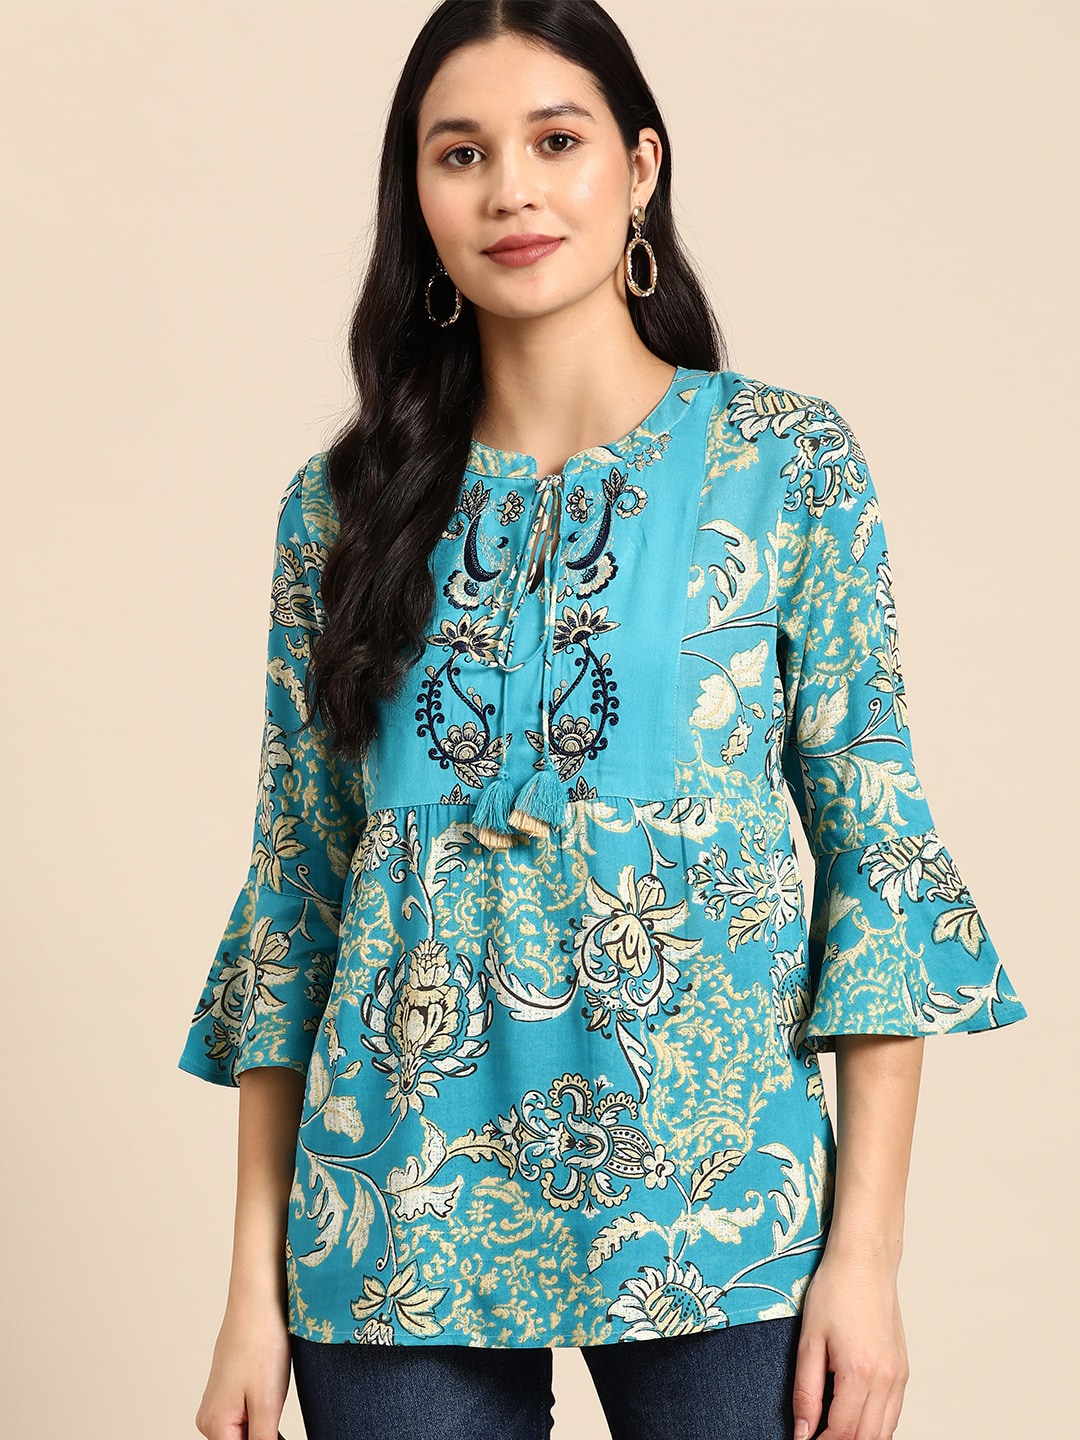 all about you Ethnic Motifs Printed Kurti Price in India